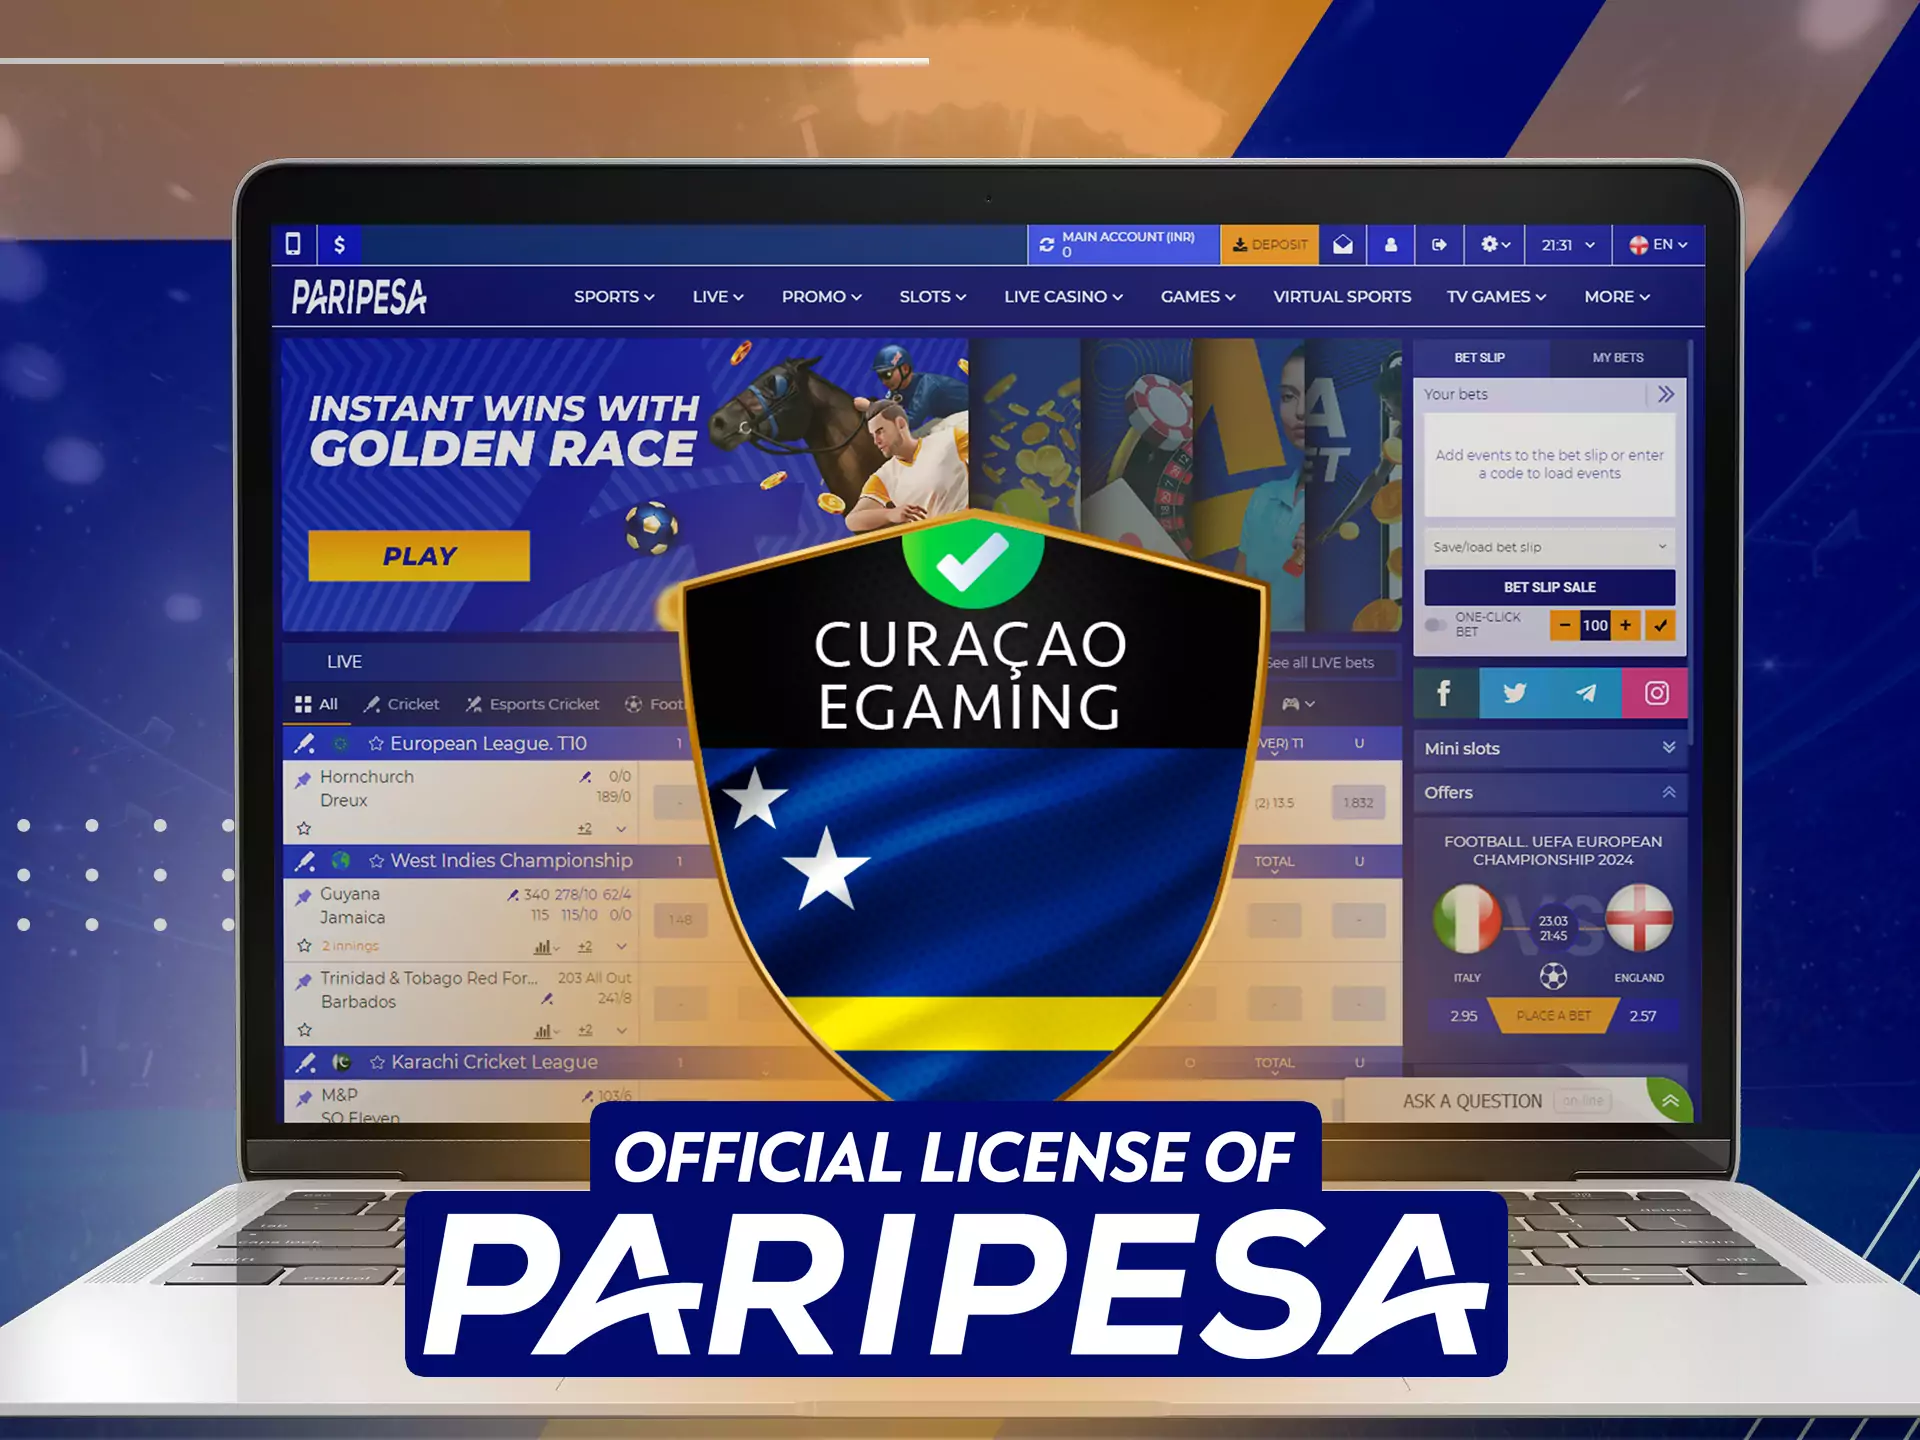 Paripesa is officially licensed and safe for players.